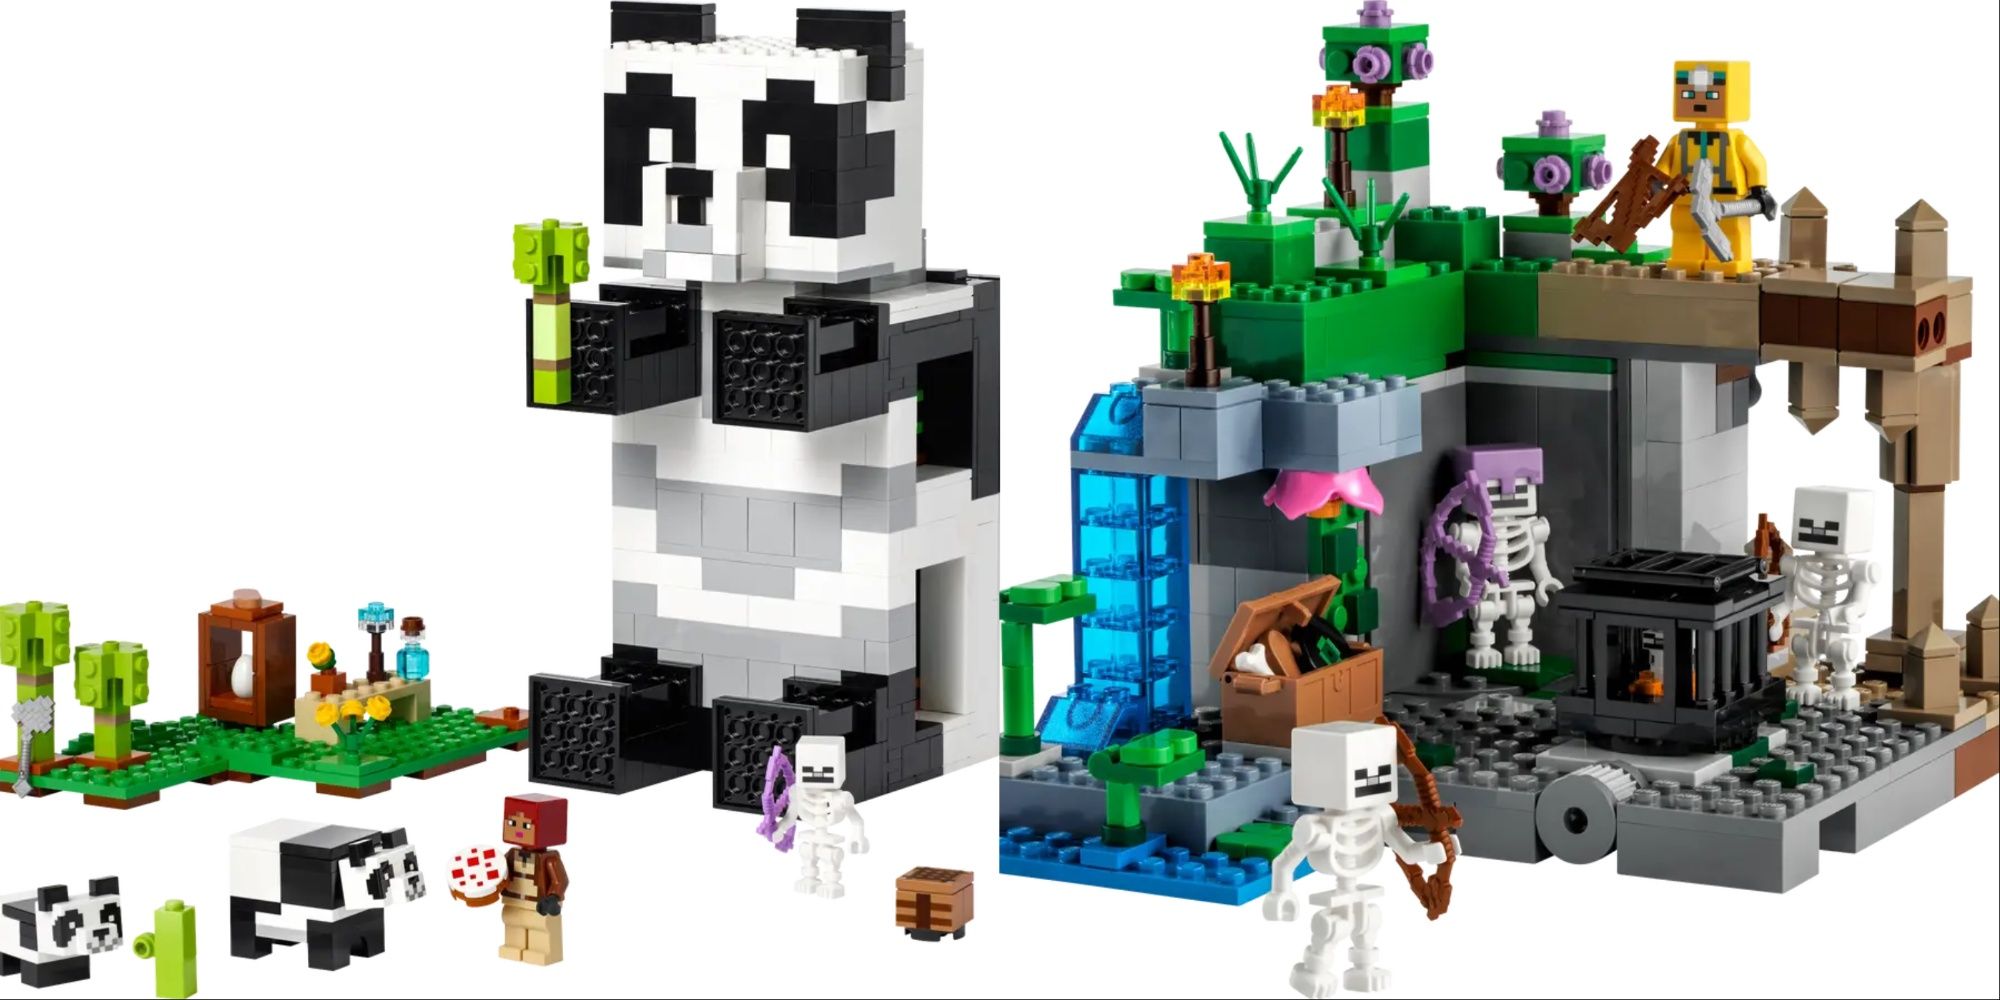 Minecraft Lego Sets Featured Split Image Panda Haven and Skeleton Dungeon